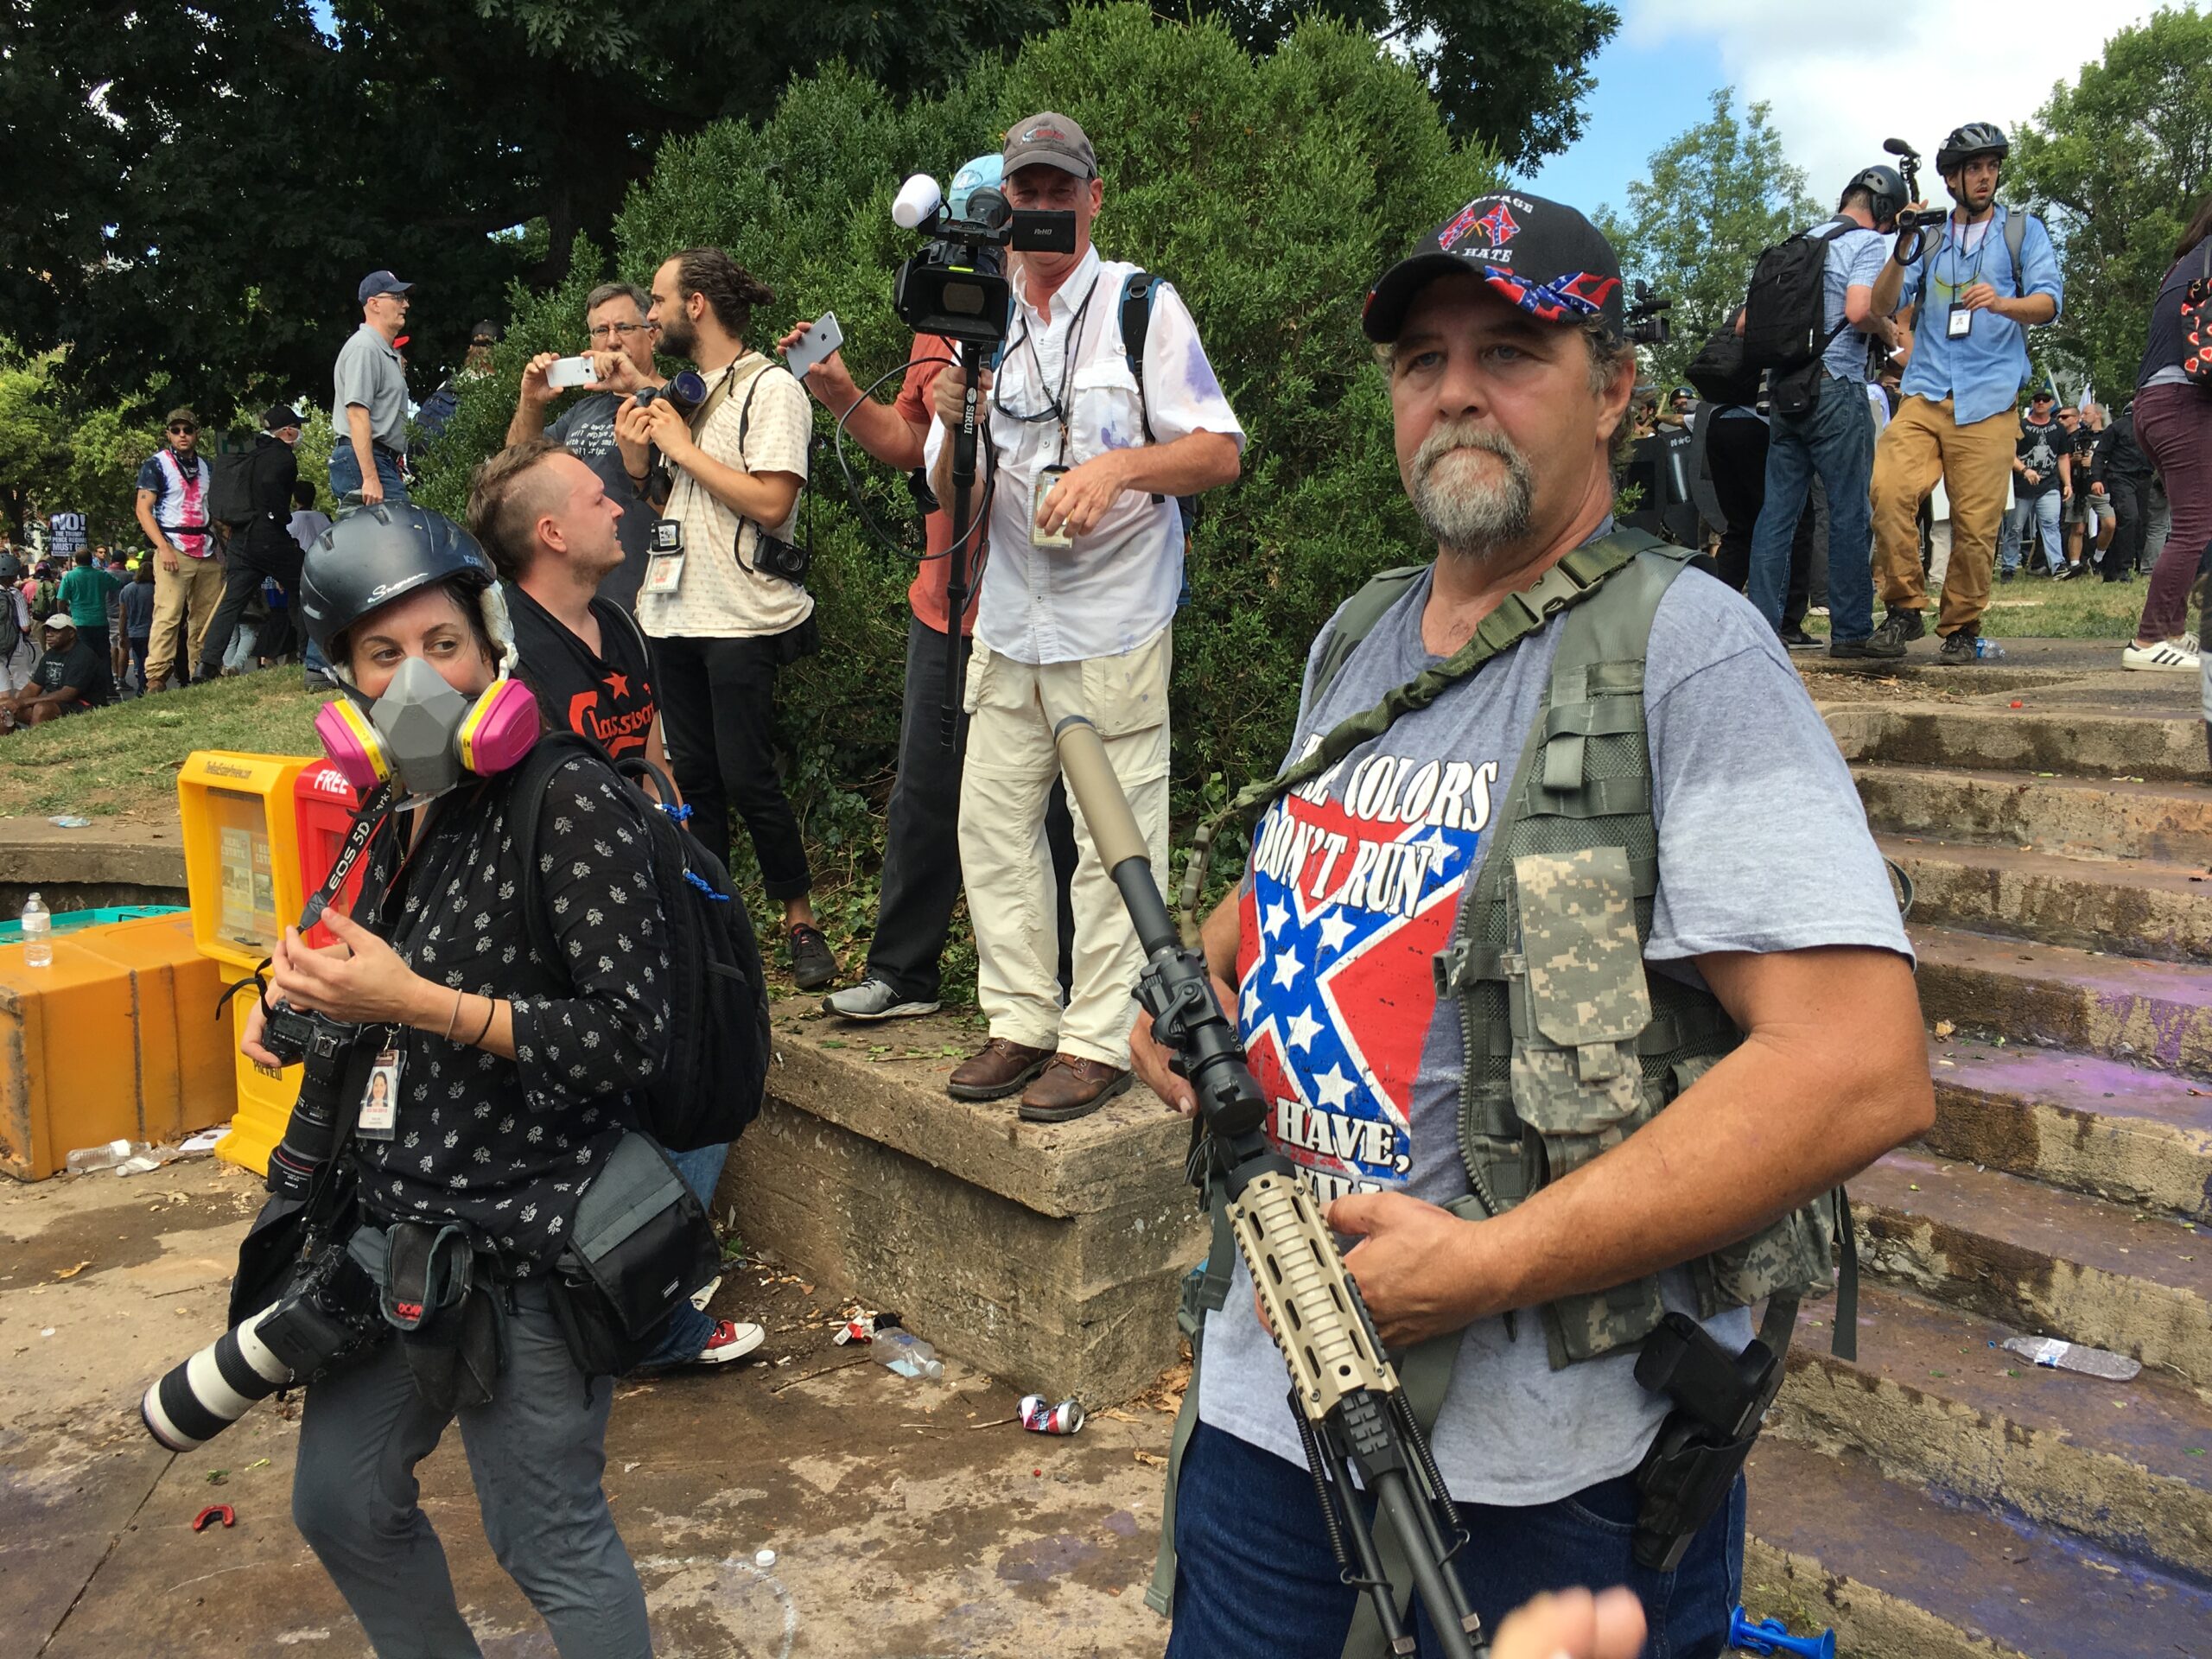 Man in Confederate flag t-shirt